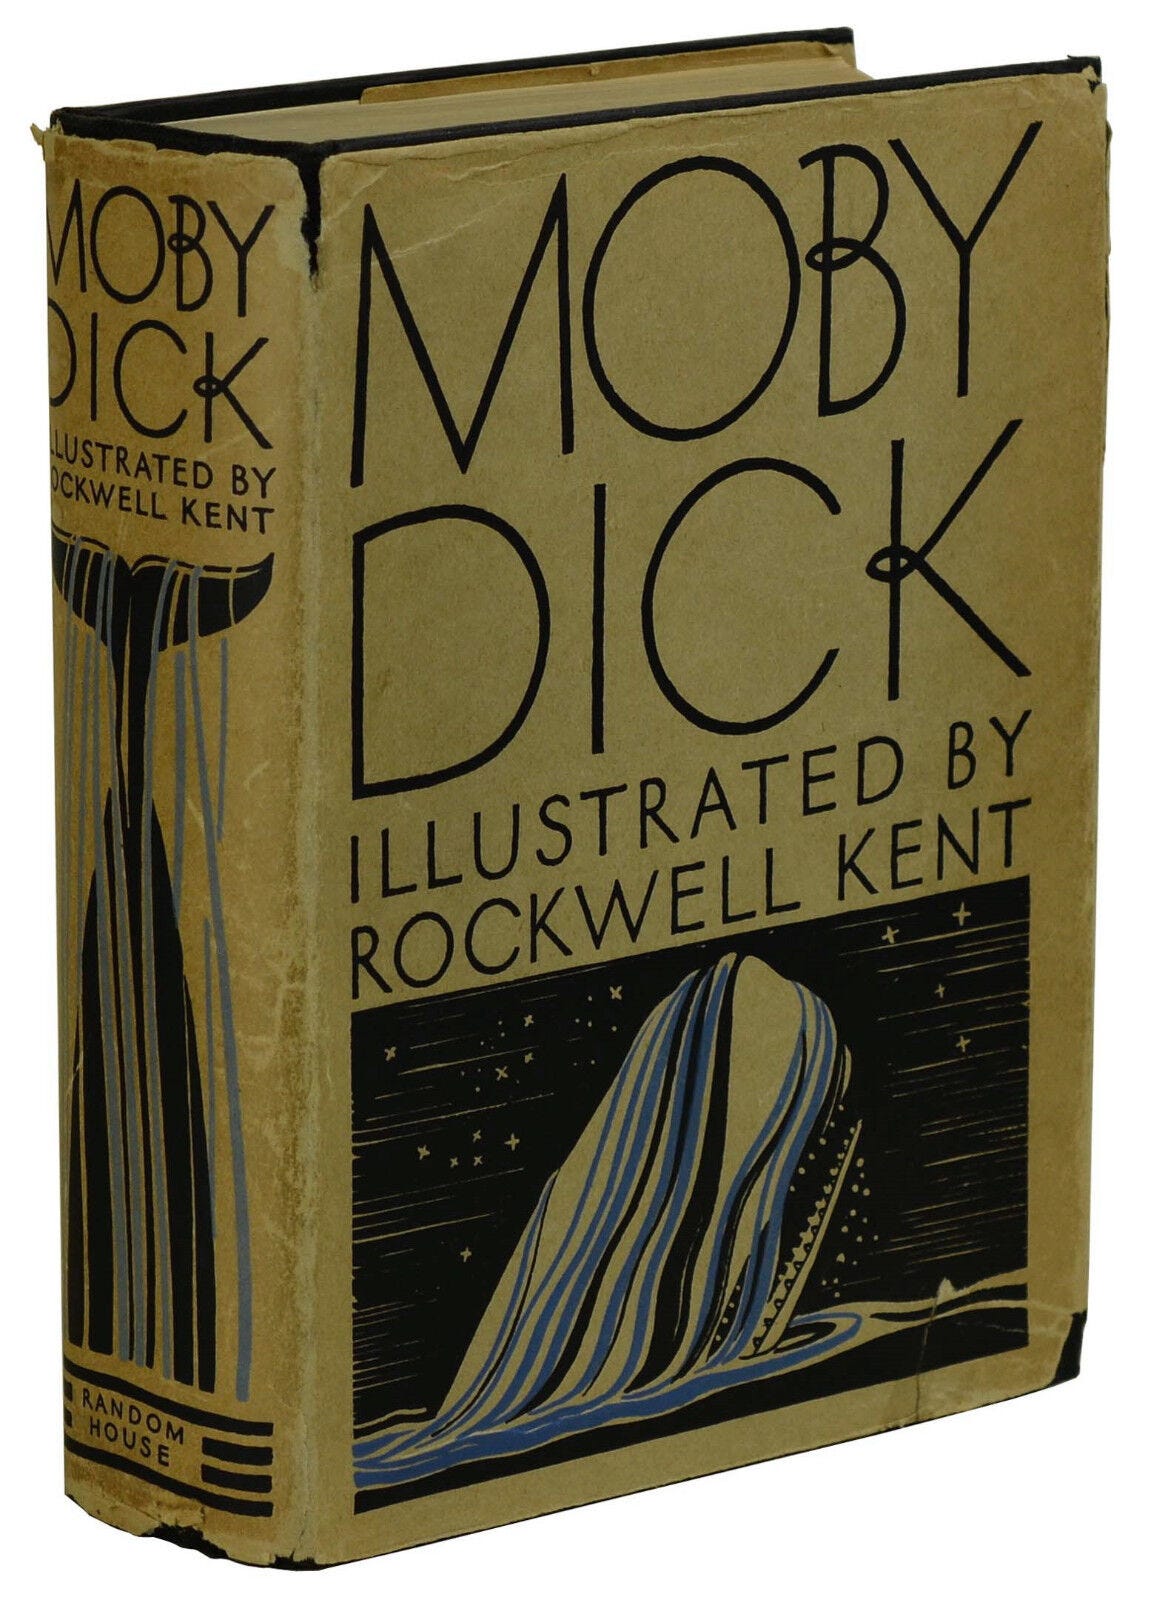 Moby Dick ~ HERMAN MELVILLE First Edition Thus ~ Dust Jacket 1930 ROCKWELL  KENT | eBay